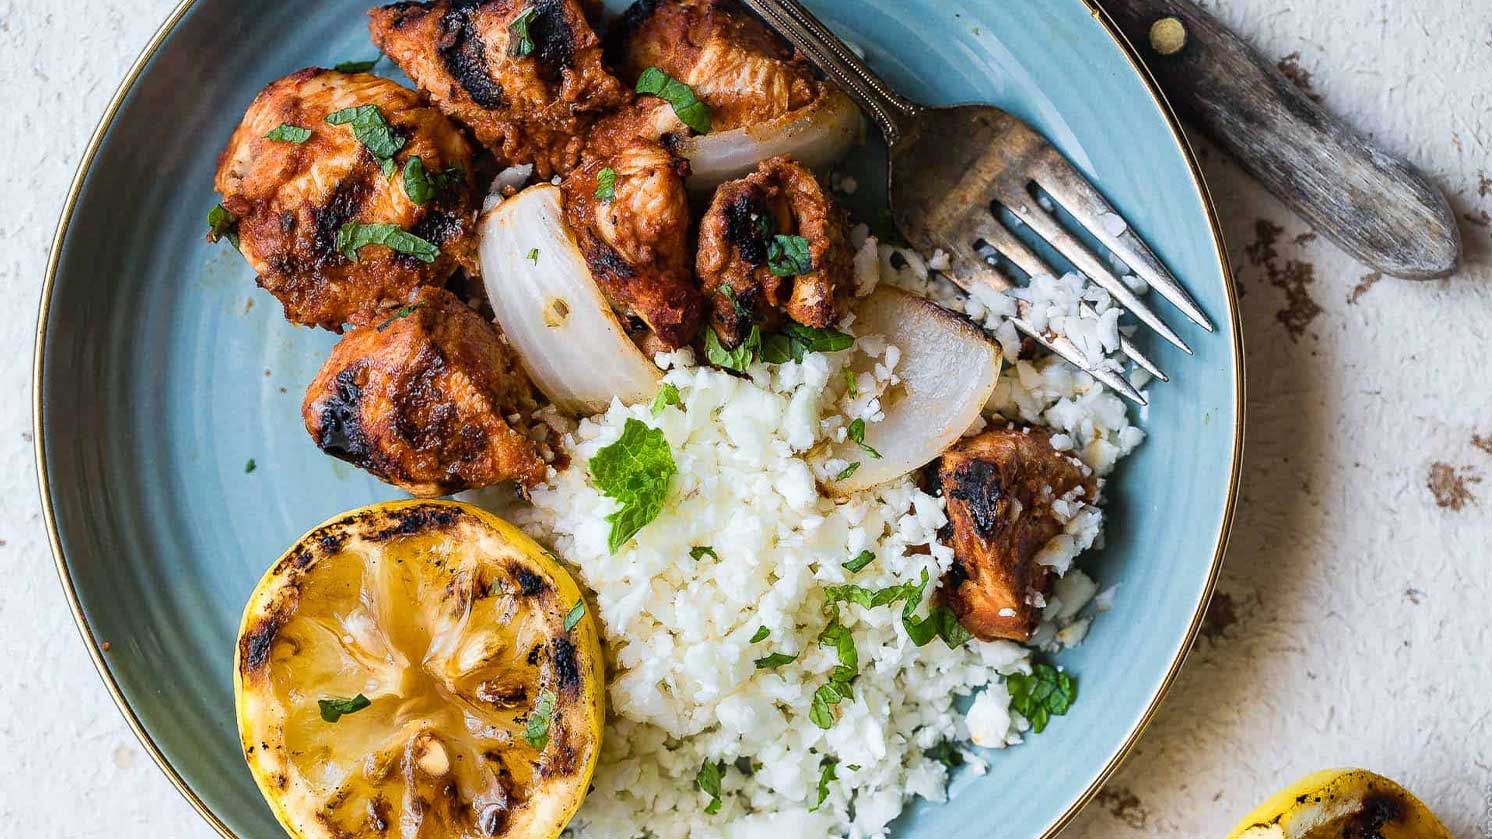 Tomato Grilled Moroccan Chicken with Mint Yogurt Sauce